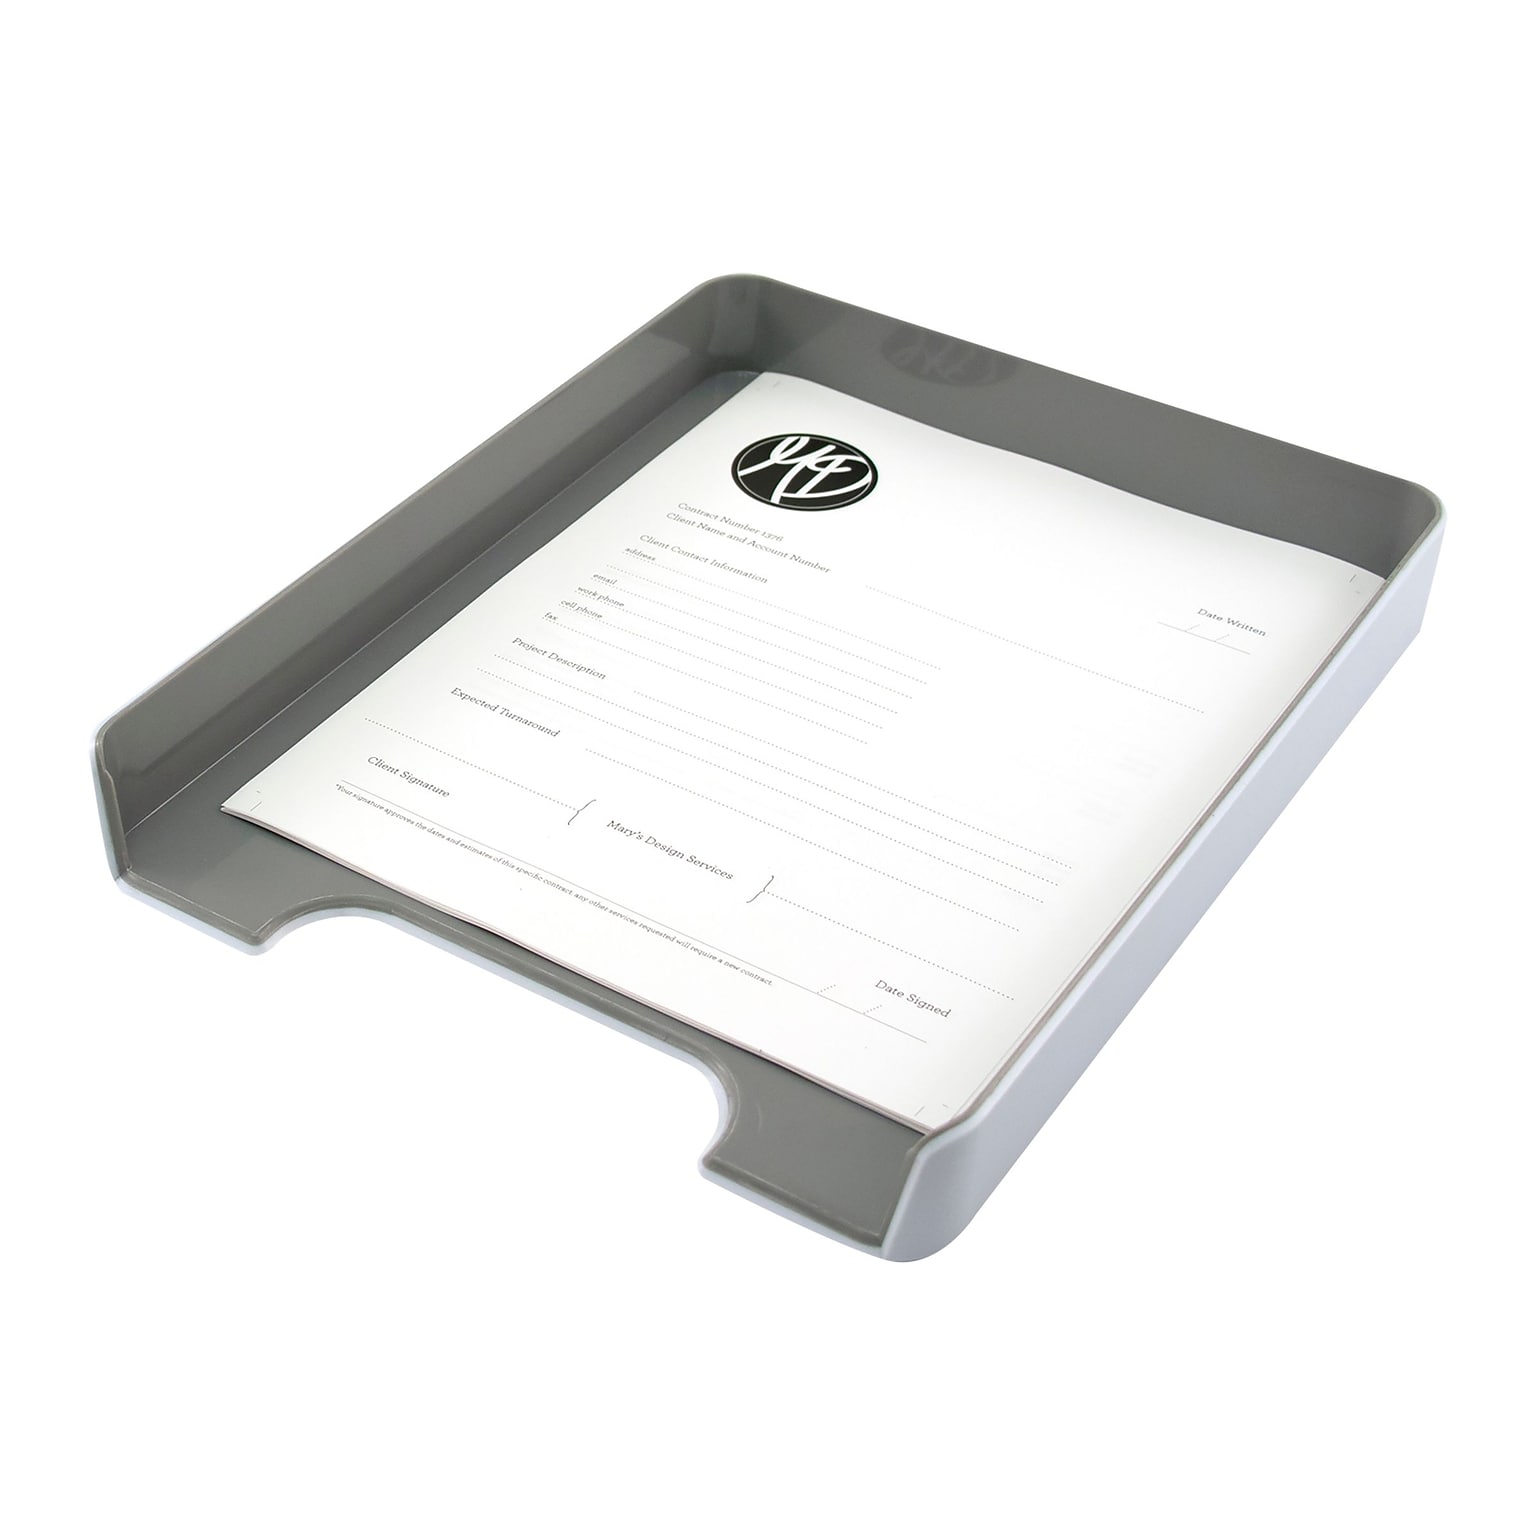 Fusion Letter Tray, White and Gray (37522)